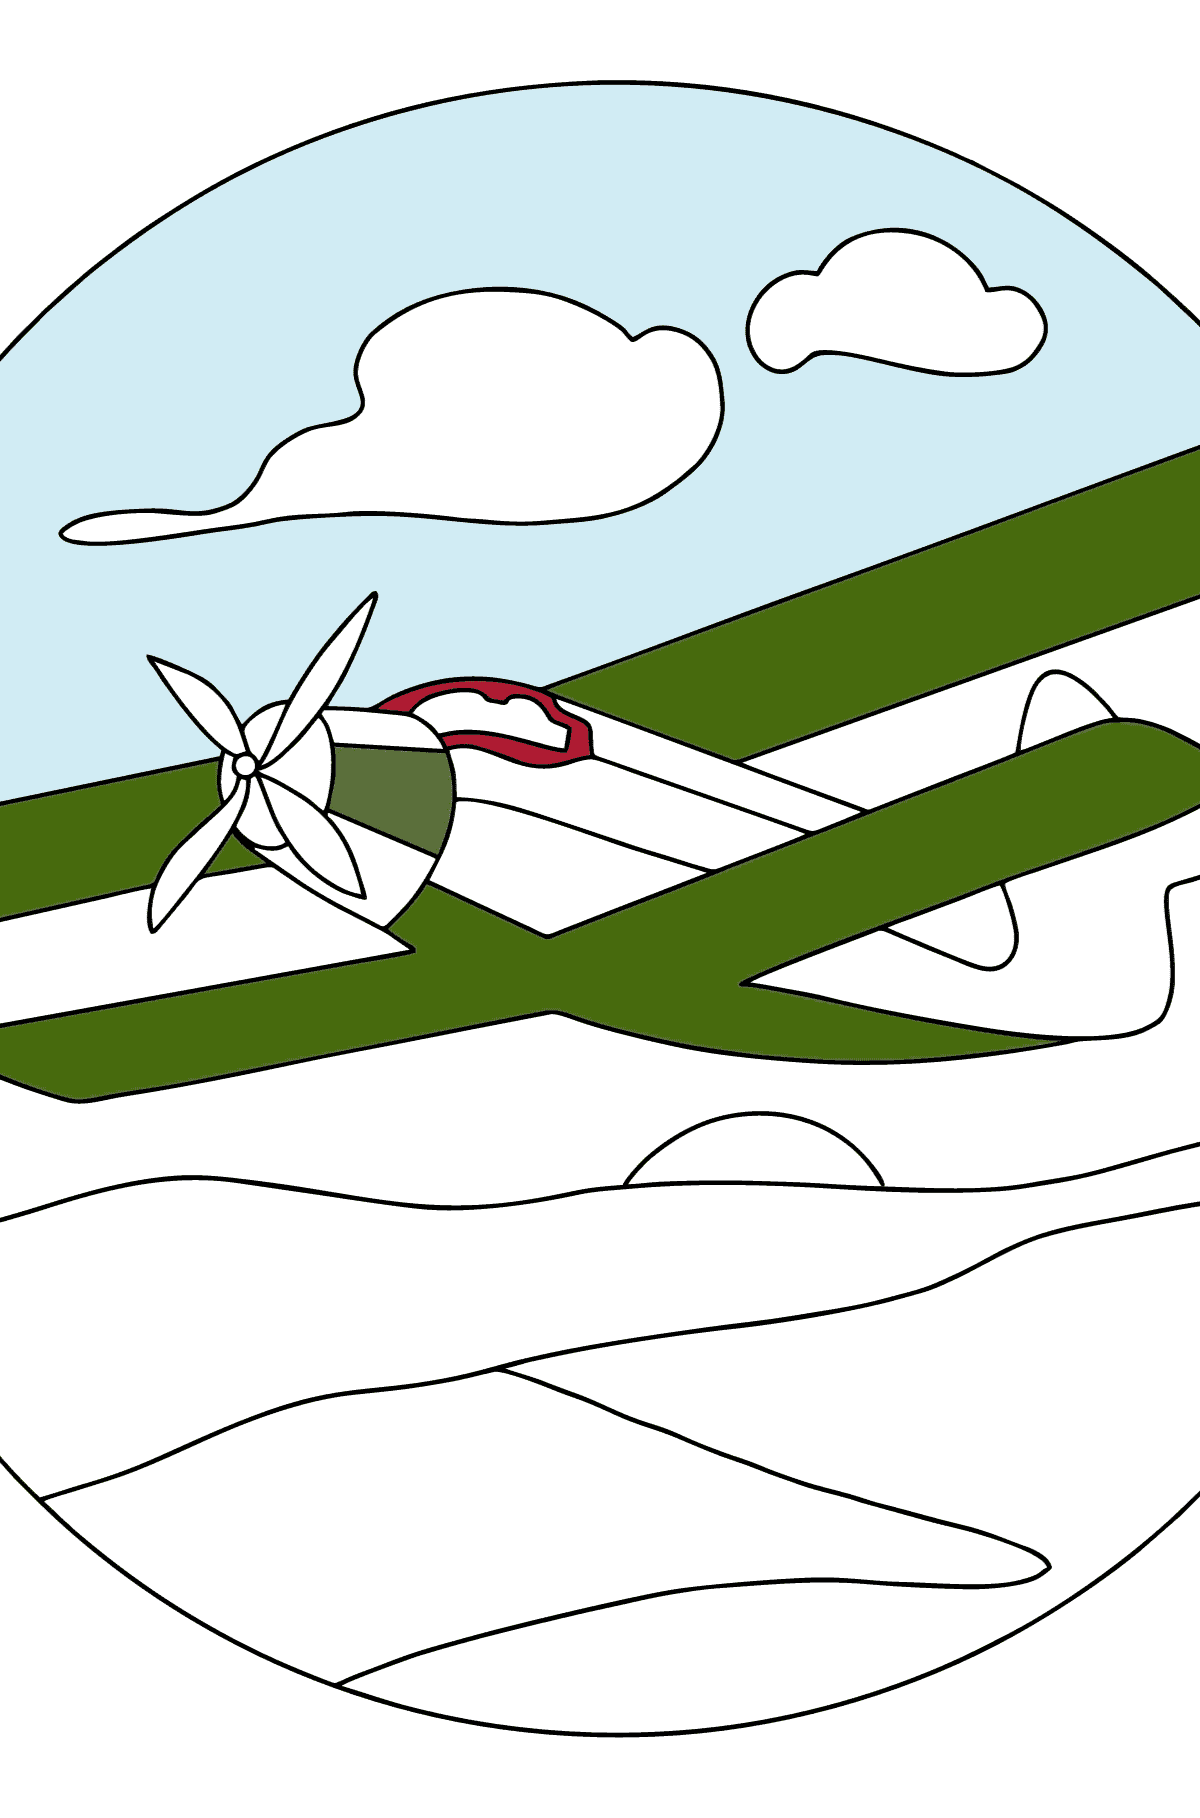 Coloring Page - A Biplane - Coloring Pages for Kids